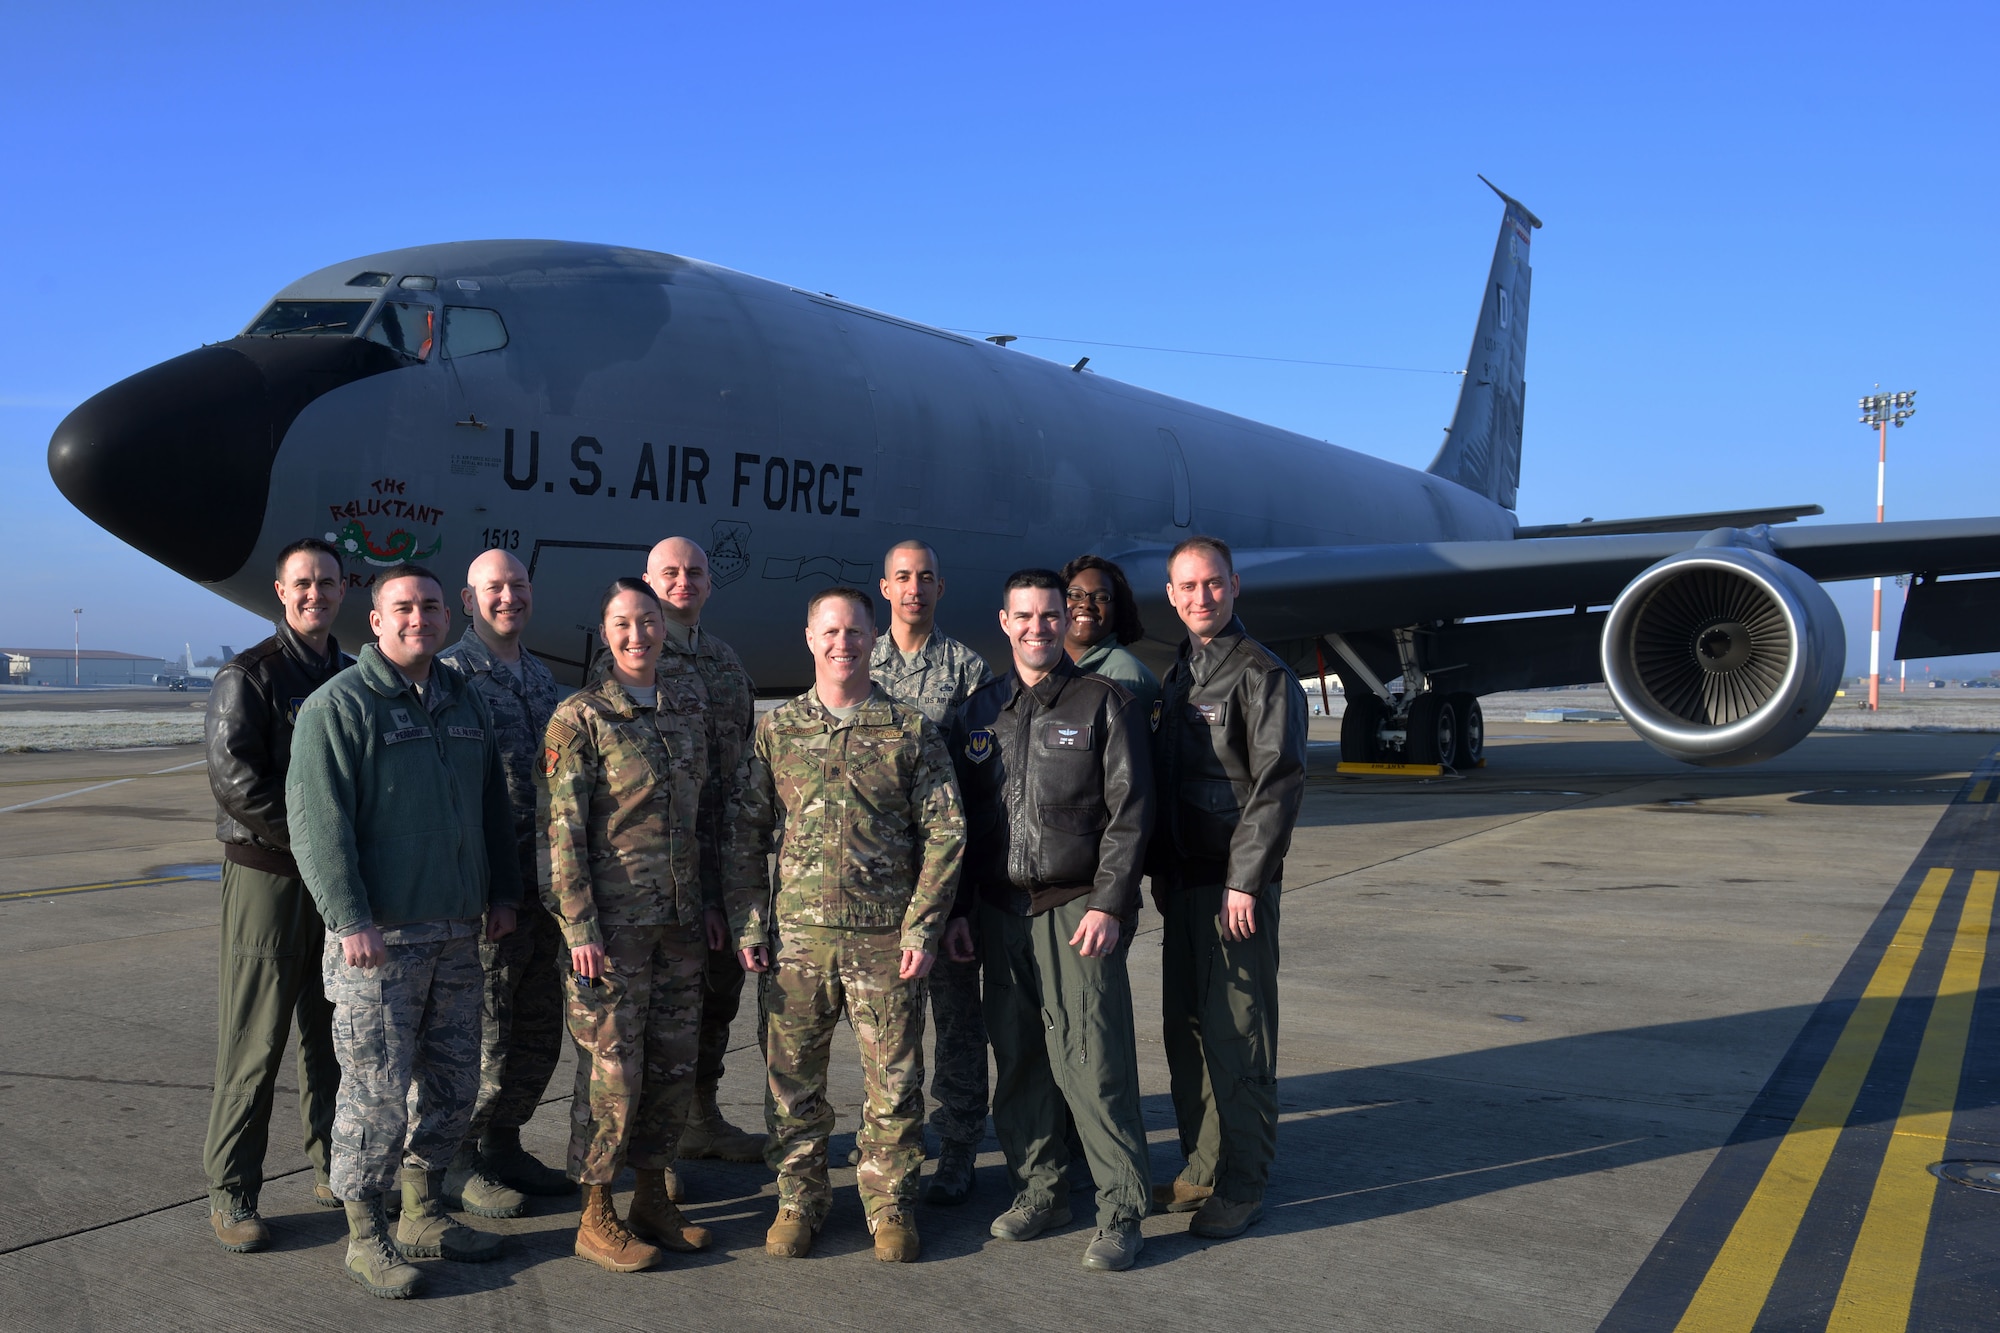 The Team Mildenhall 100th Air Refueling Wing Inspector General Team poses for a group photo at RAF Mildenhall, England, Jan. 31, 2019. Team Mildenhall has been in constant preparation for the unit effectiveness inspection with the inspector general team’s base evaluations, exercises, and commander inspection programs. (U.S. Air Force photo by Karen Abeyasekere)